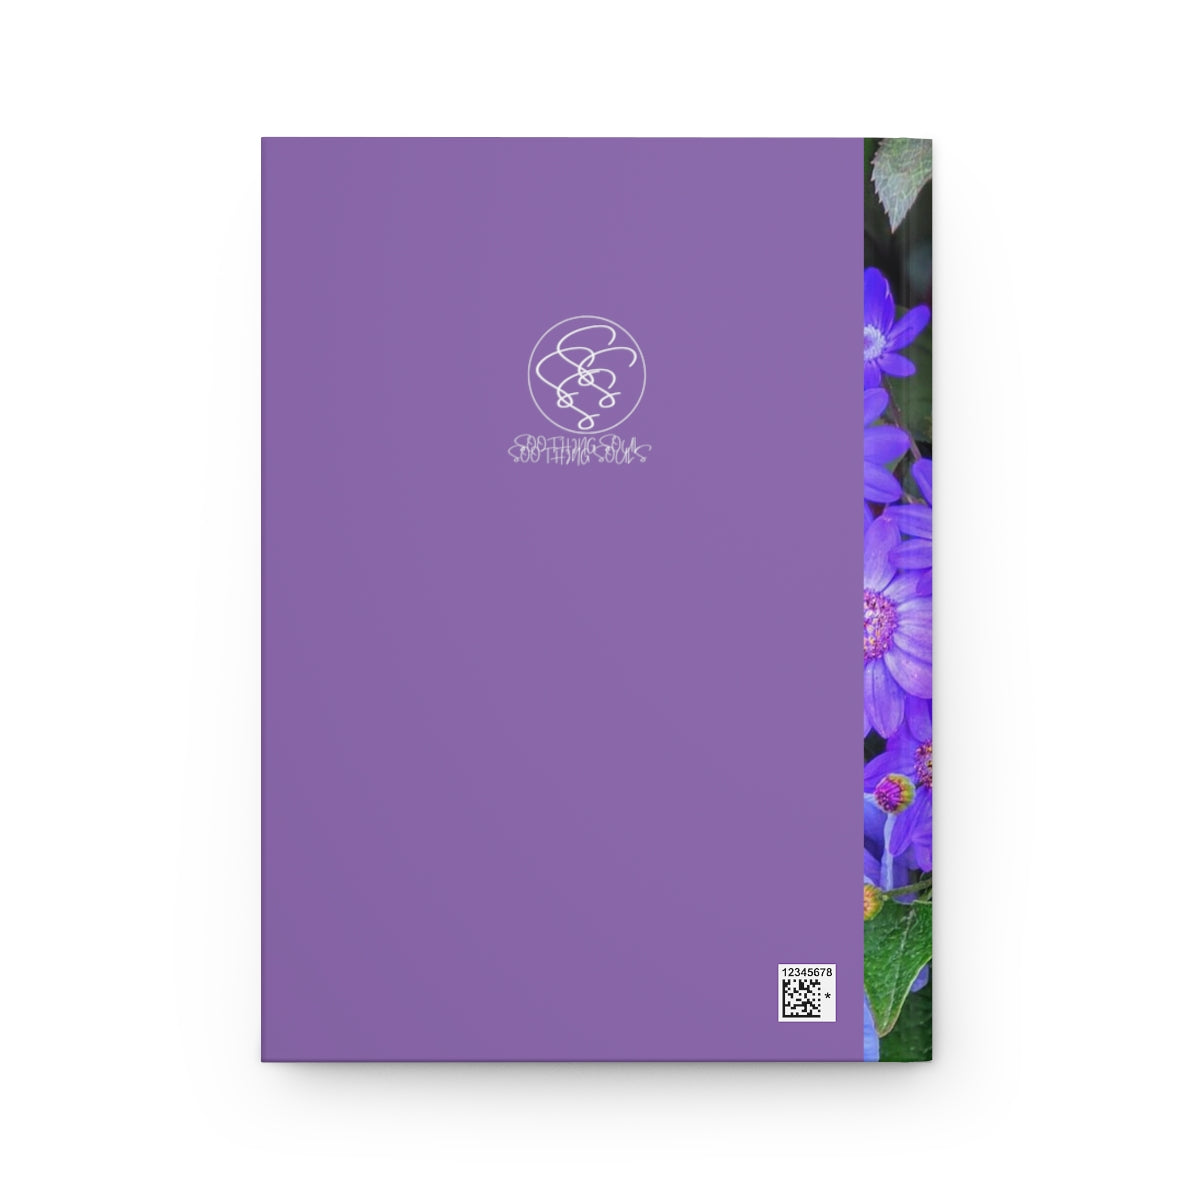 SSSS Pericall-Hy Hardcover Journal